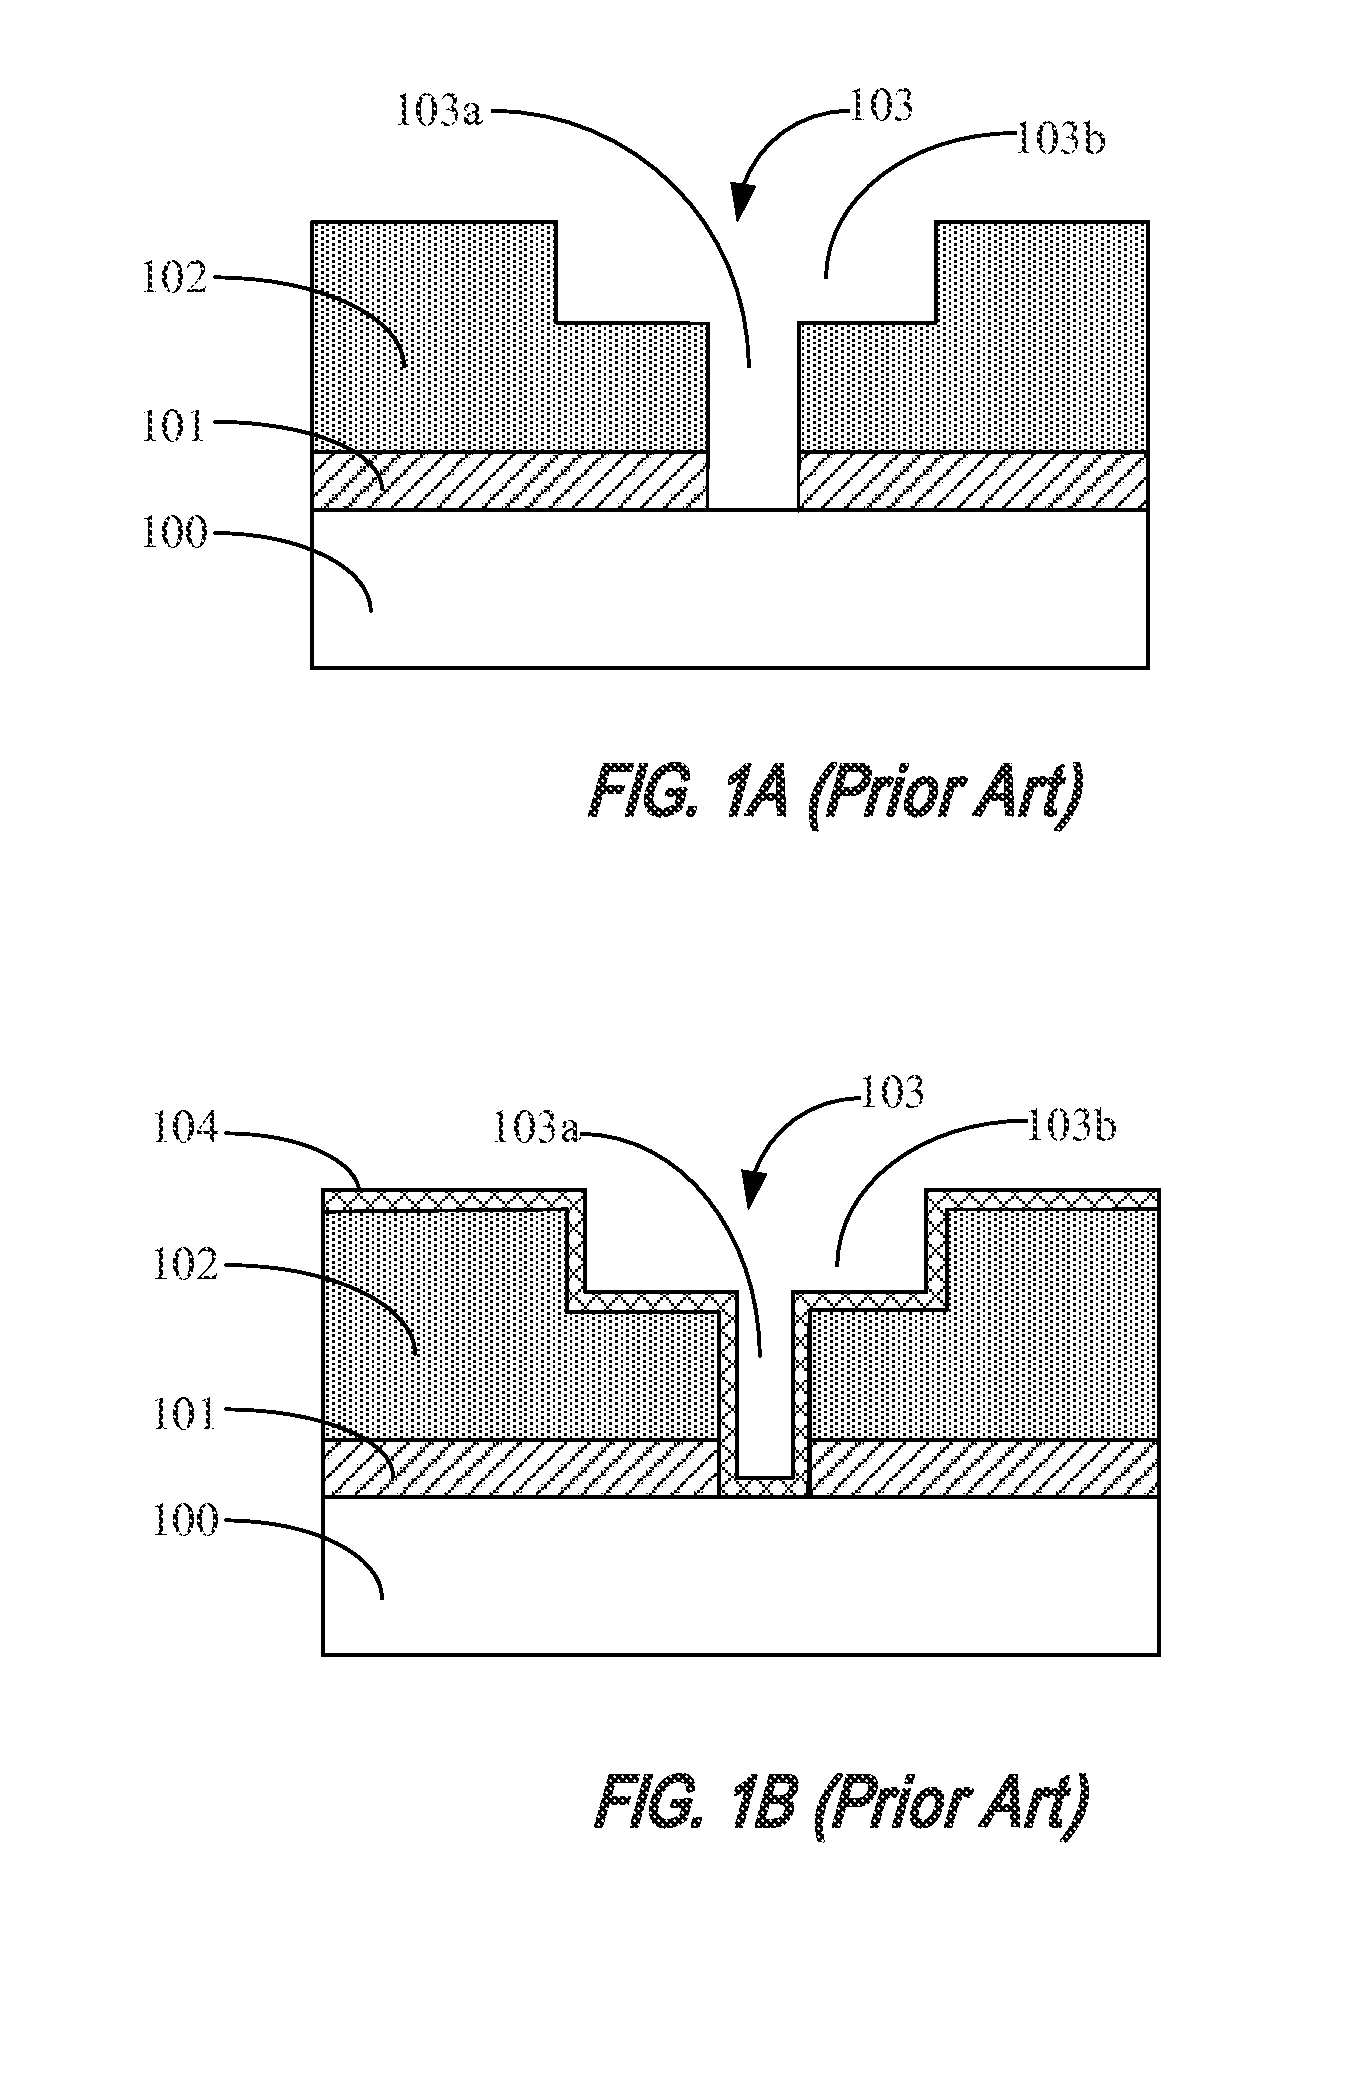 Method for improving adhesion between porous low k dielectric and barrier layer